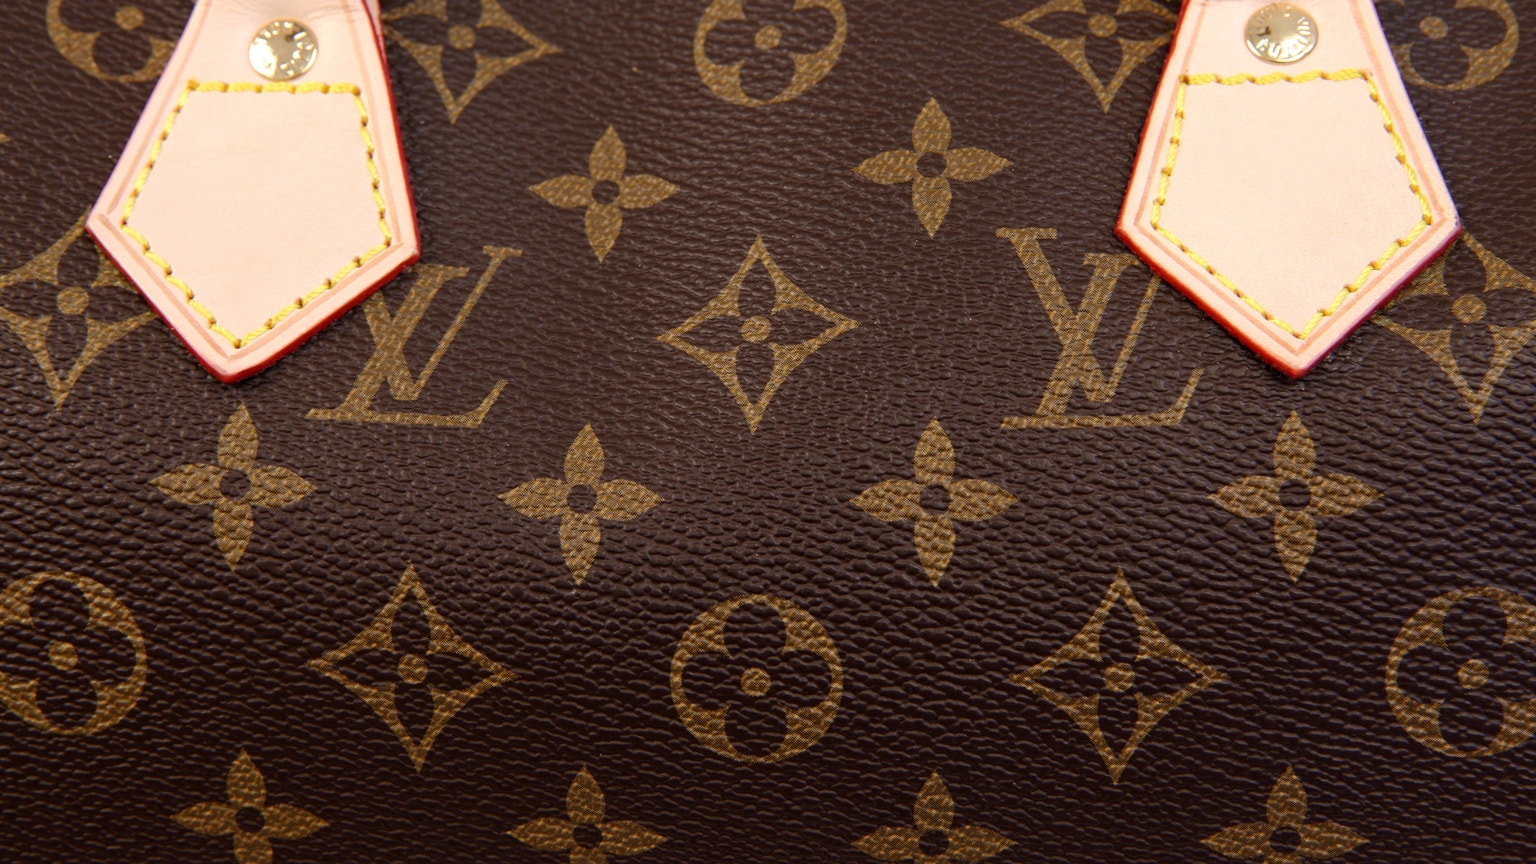 LVMH Bounces Back on Demand for Louis Vuitton and Dior Bags